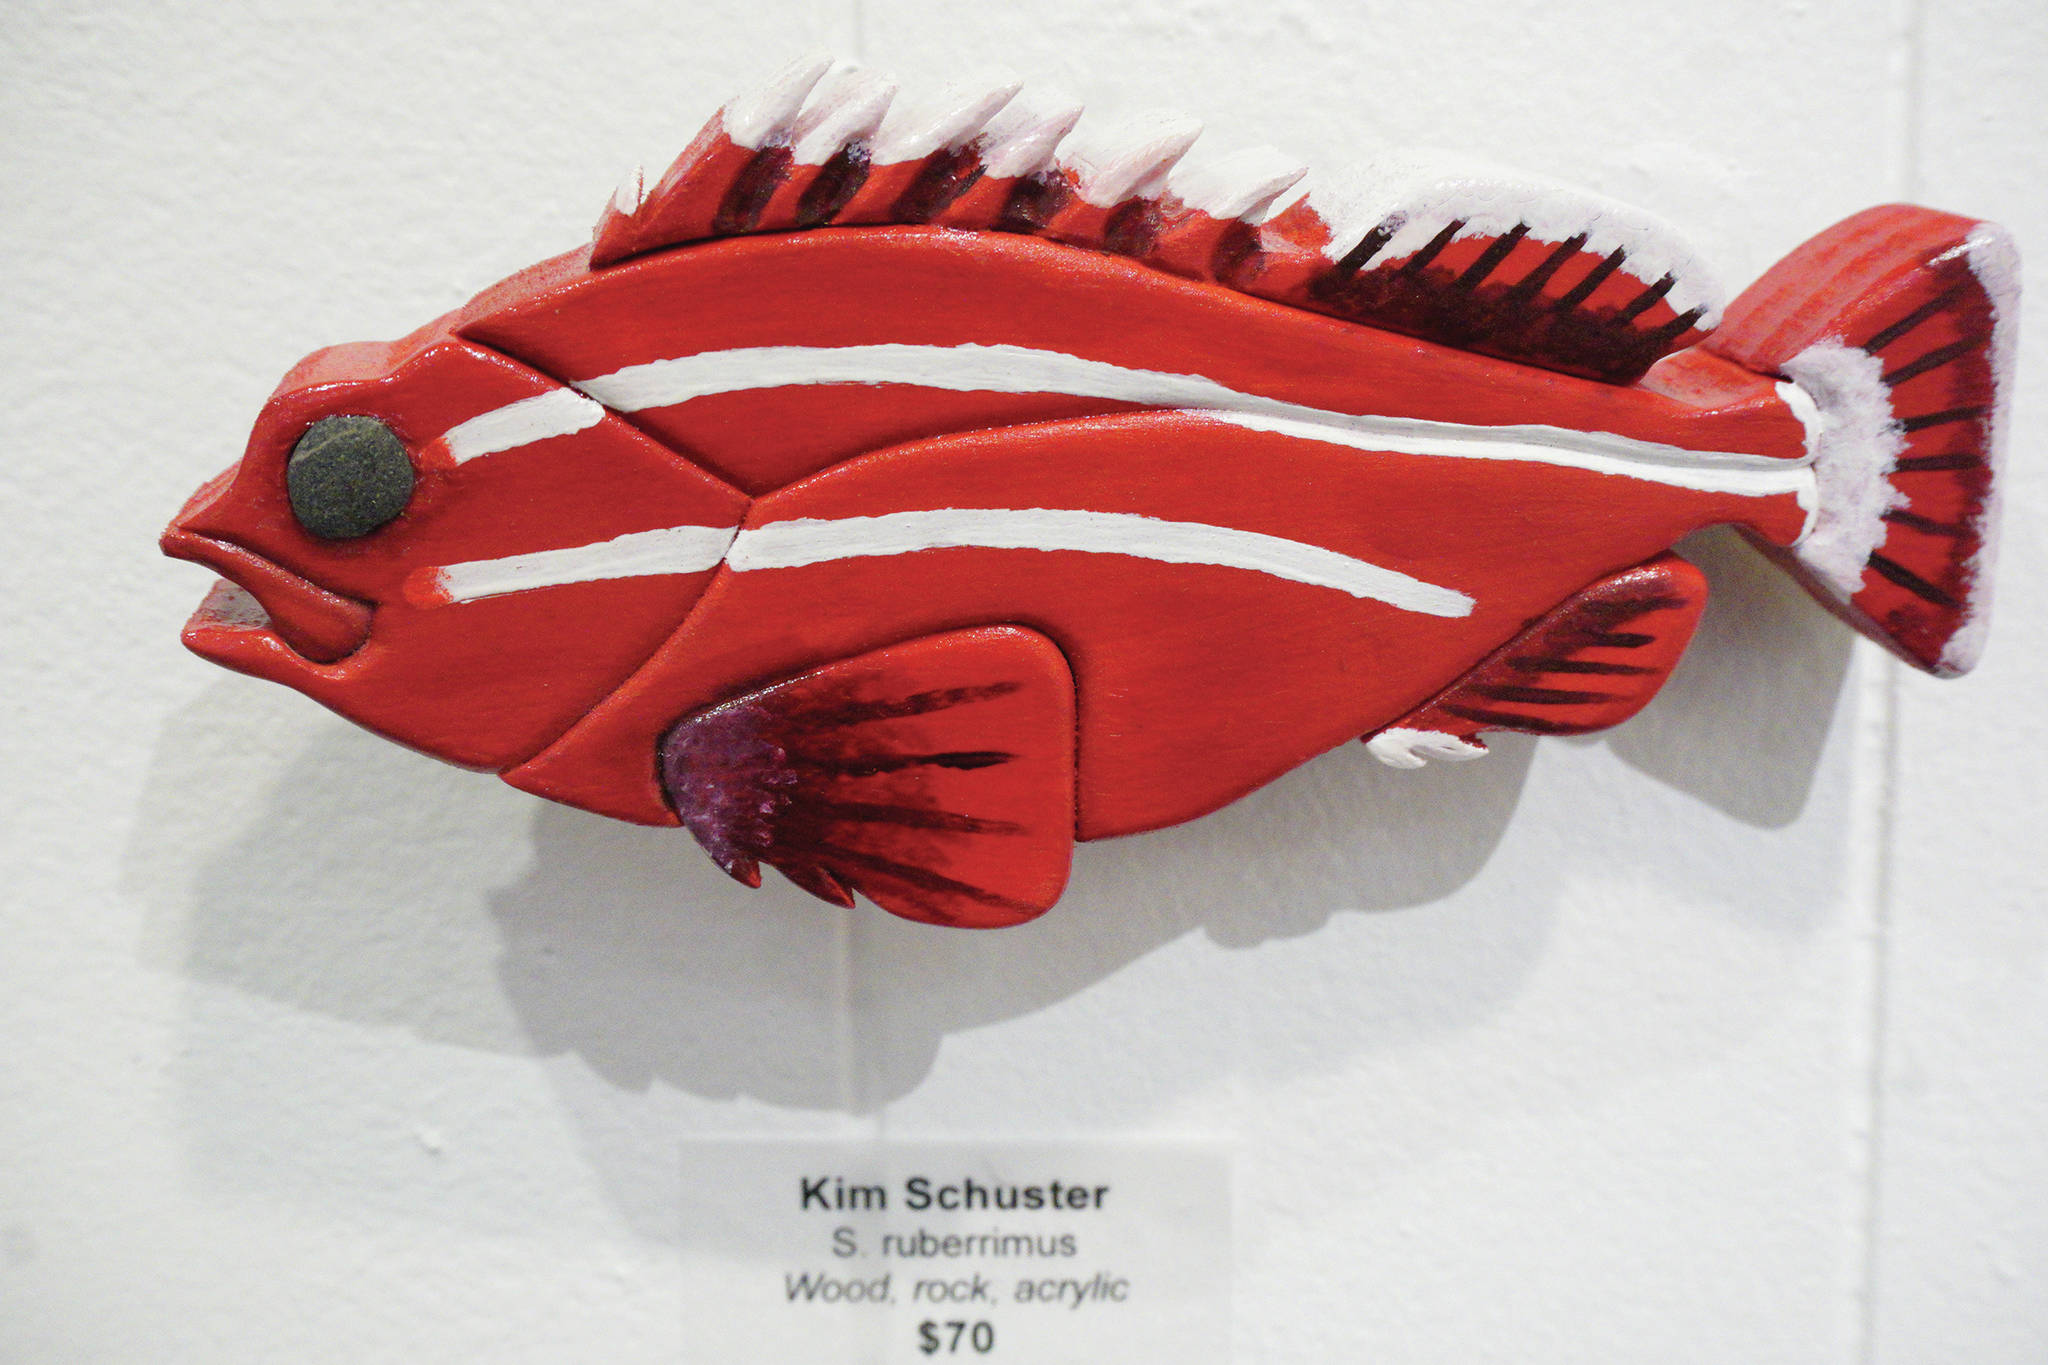 Kim Schuster’s “S. rubberimus”” is one of the pieces in the 5x7 show at the Homer Council on the Arts that opened on Nov. 1, 2019, in Homer, Alaska. (Photo by Michael Armstrong/Homer News)